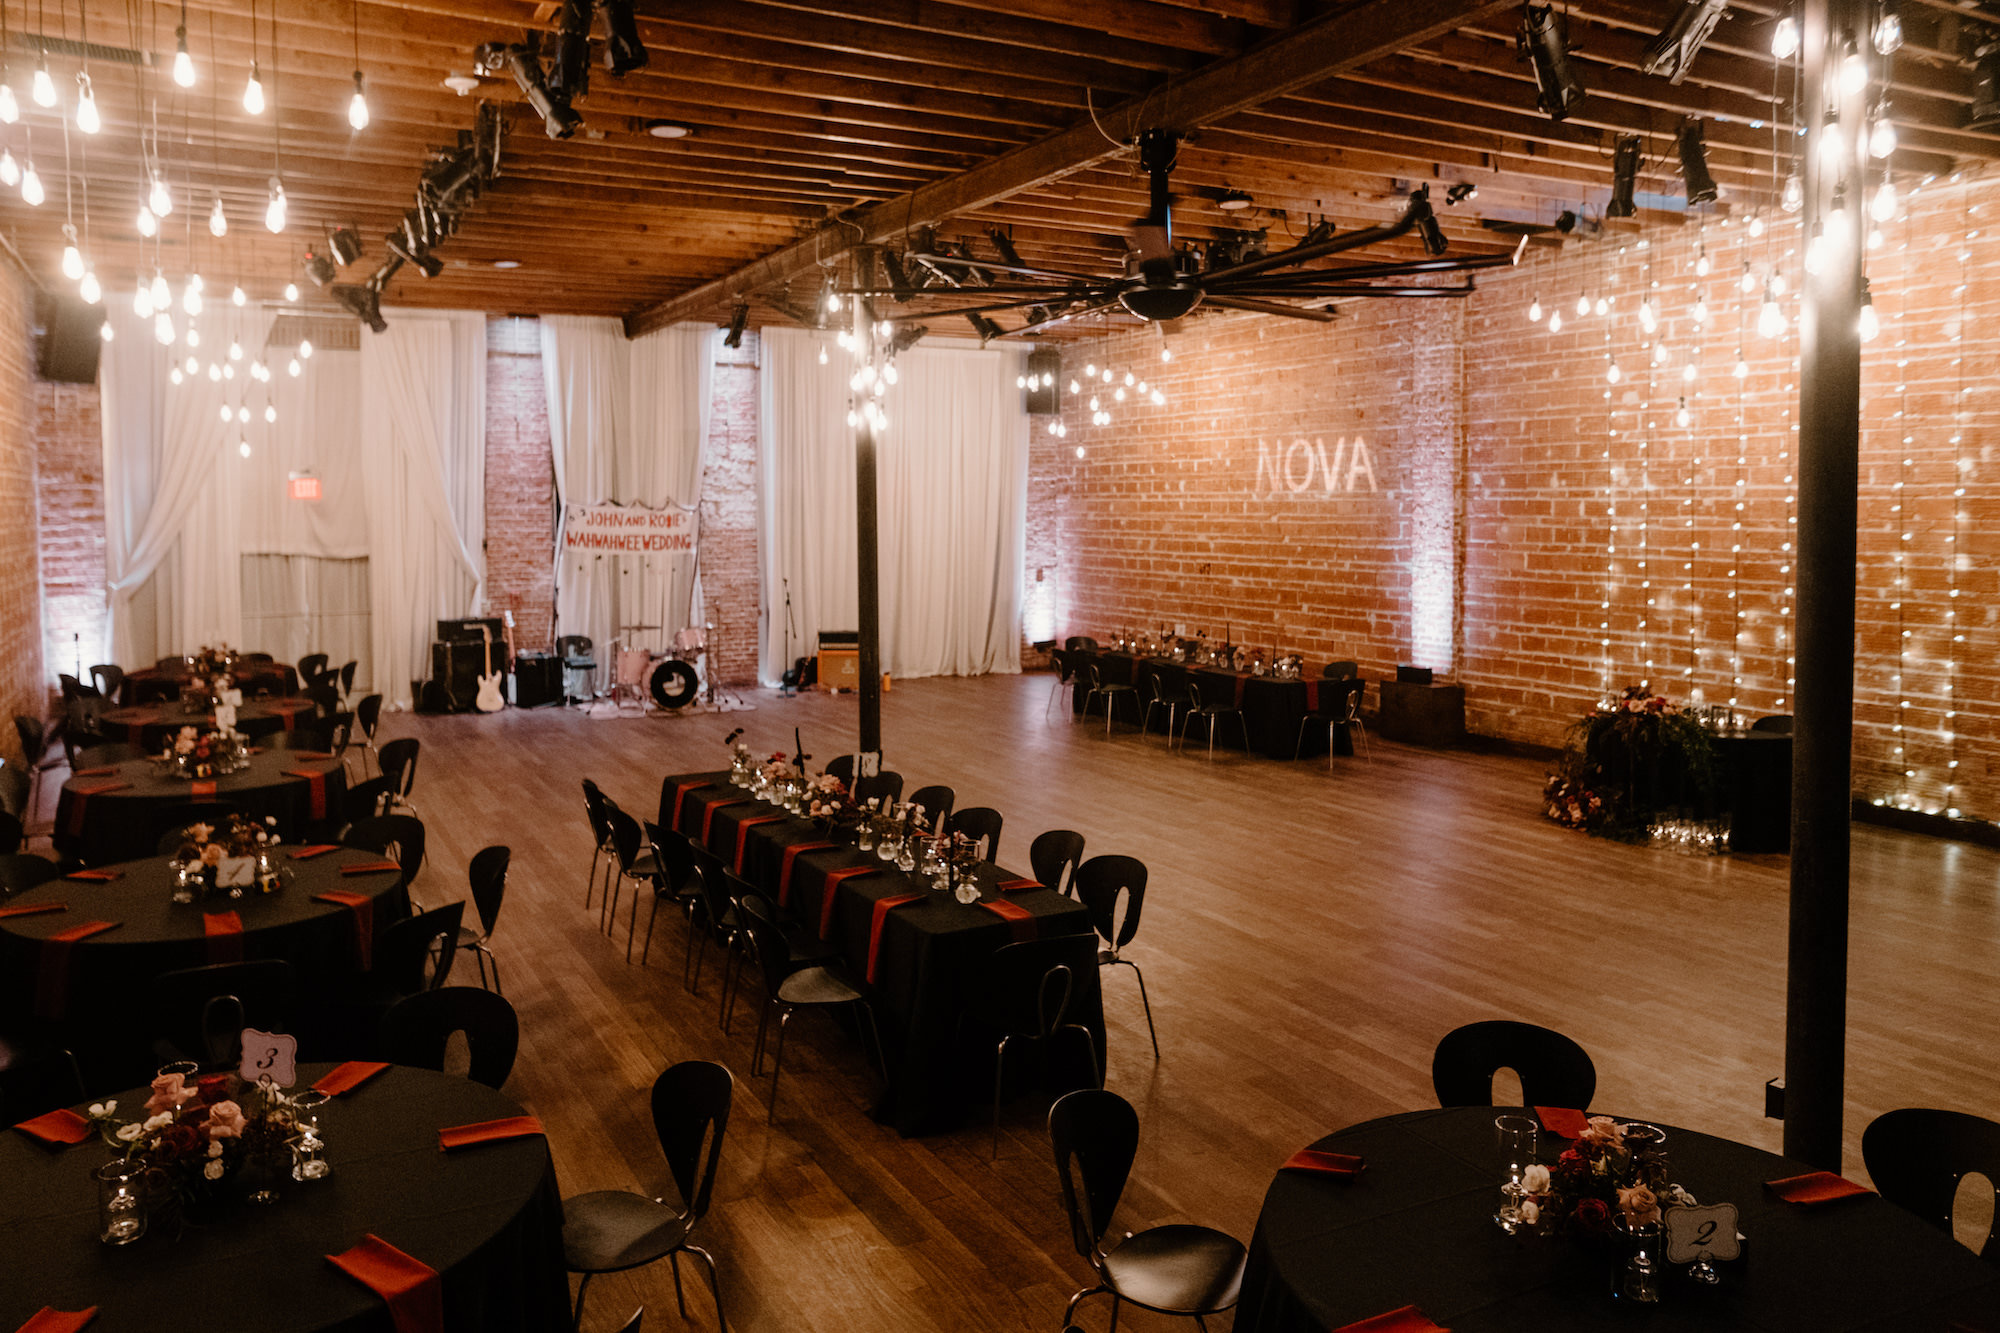 Industrial Wedding Reception with Black Modern Chairs | Long Feasting Tables | St. Pete Wedding Venue NOVA 535